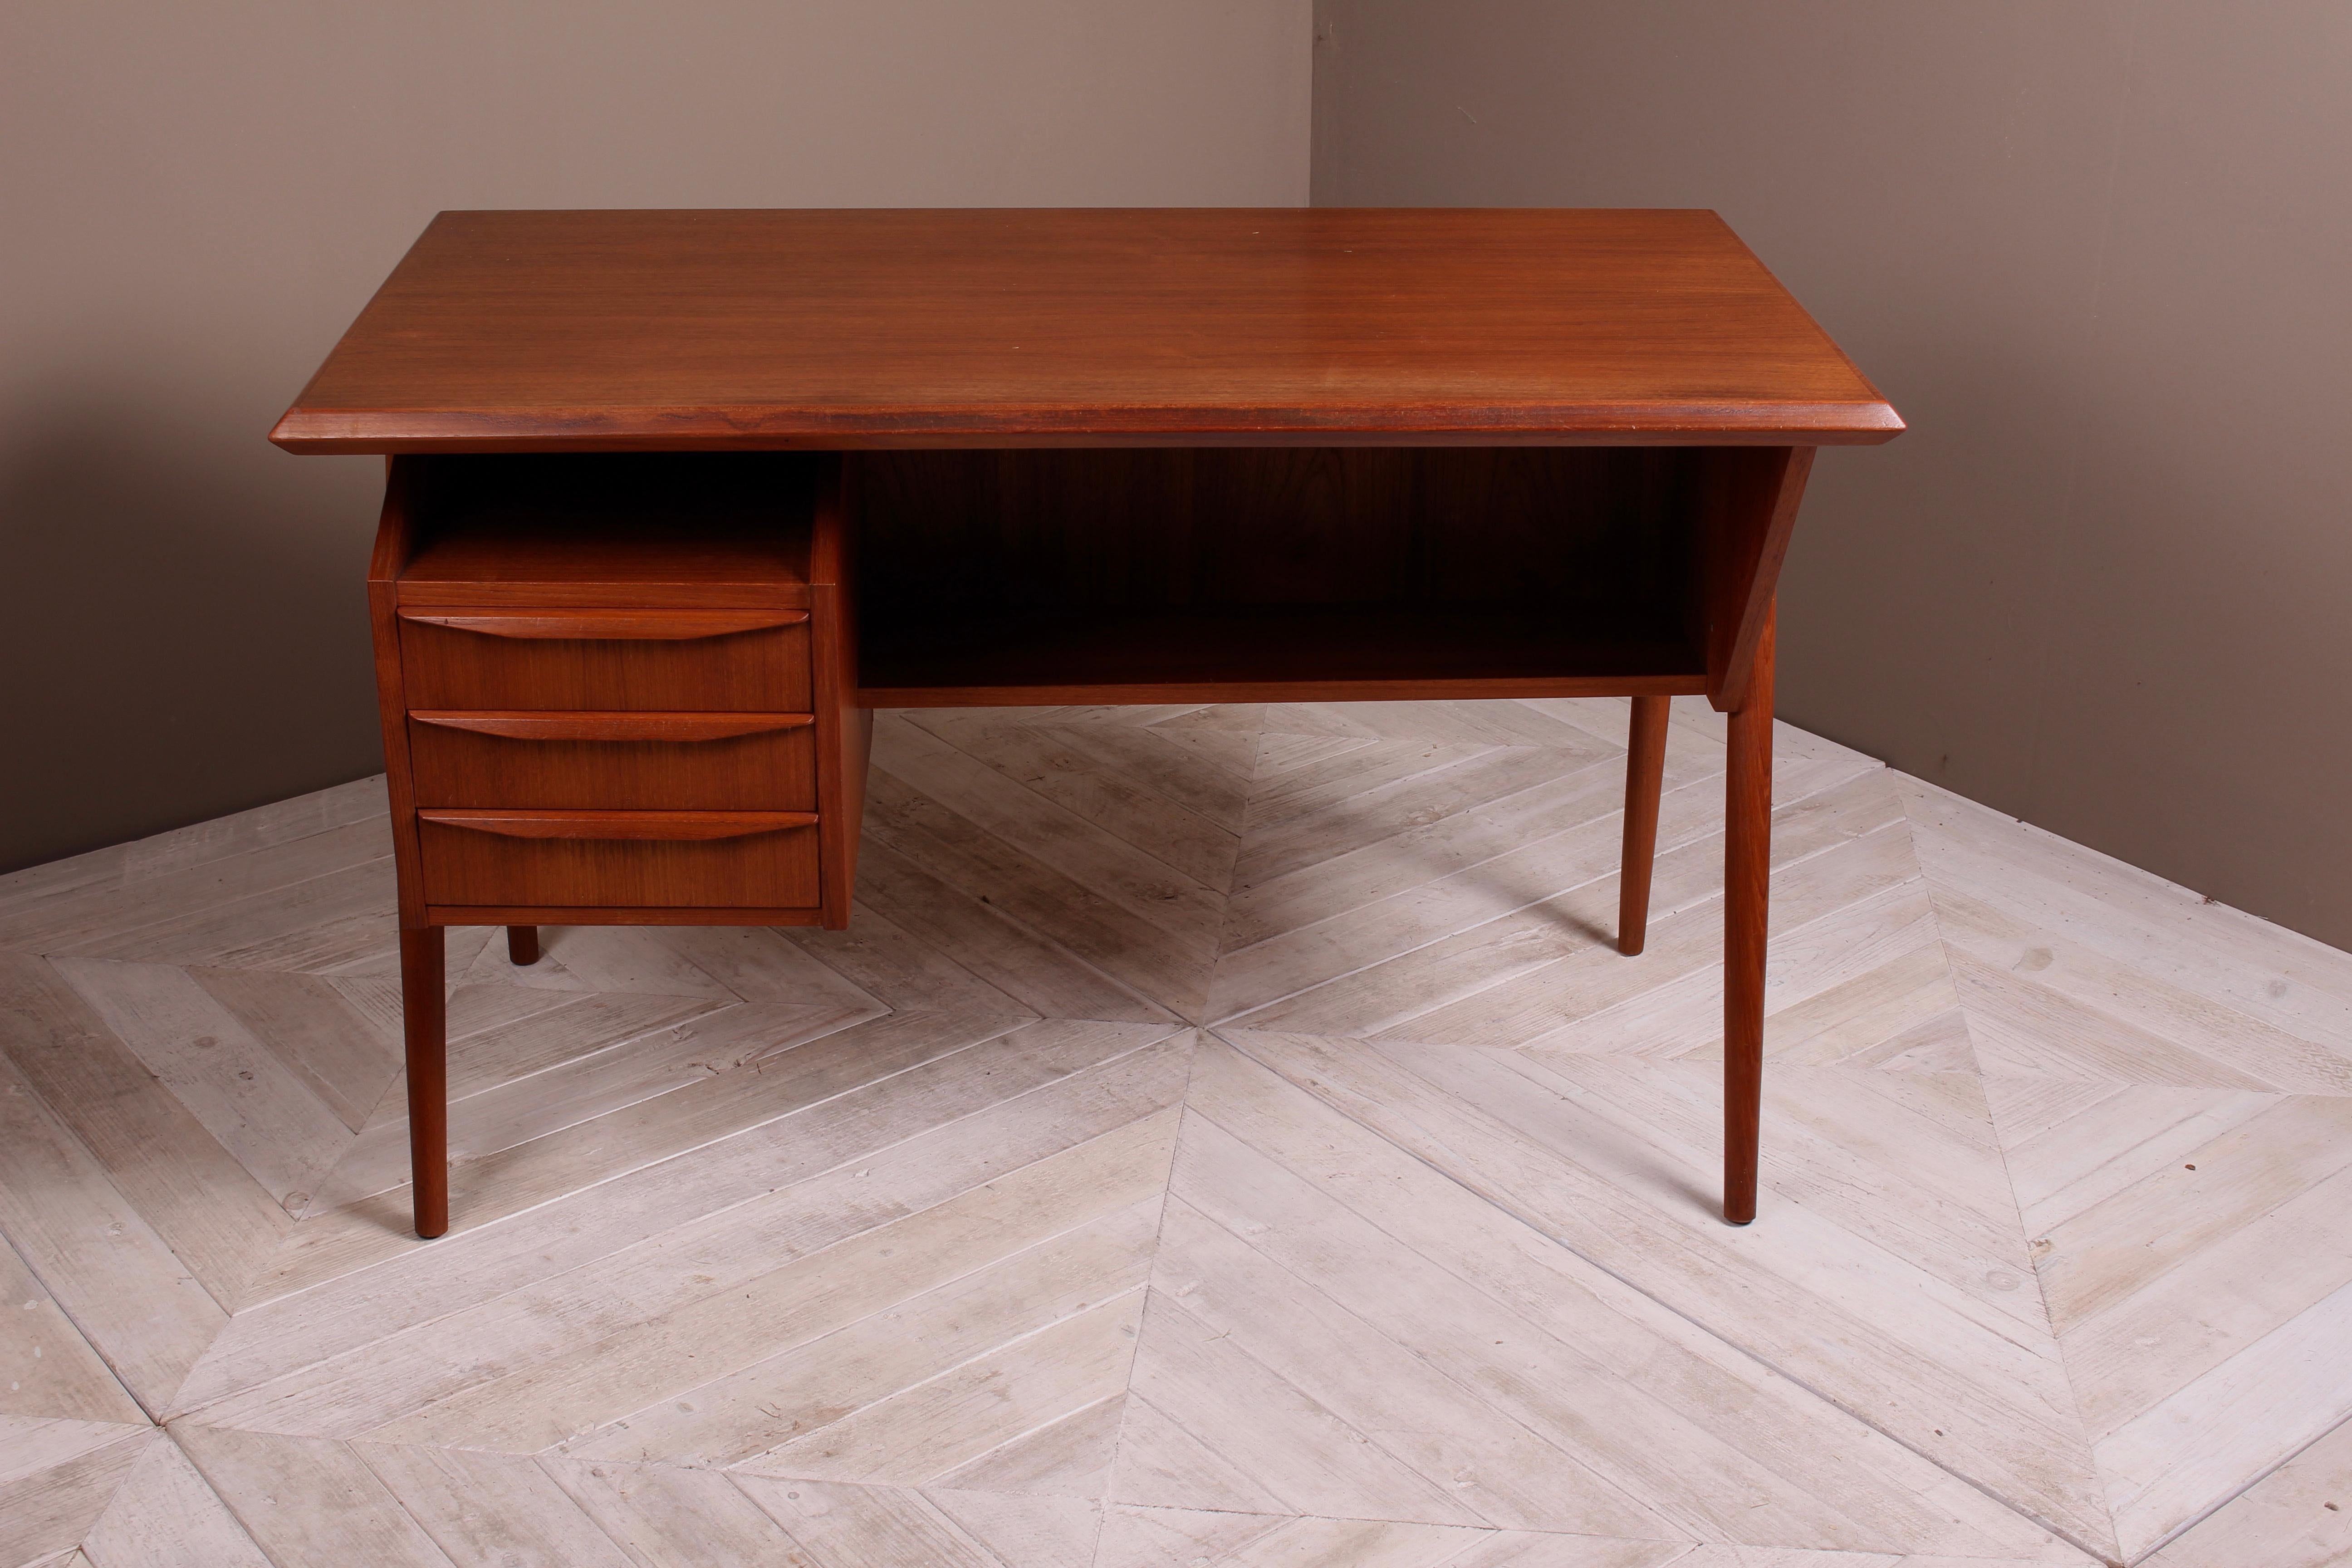 A classic midcentury Danish teak desk and chair by Gunnar Nielsen Tibergaard. The bevelled edge desktop above two lower shelf sections and three drawers. Large bookshelf to the rear. Standing on turned circular angled legs. In good condition for